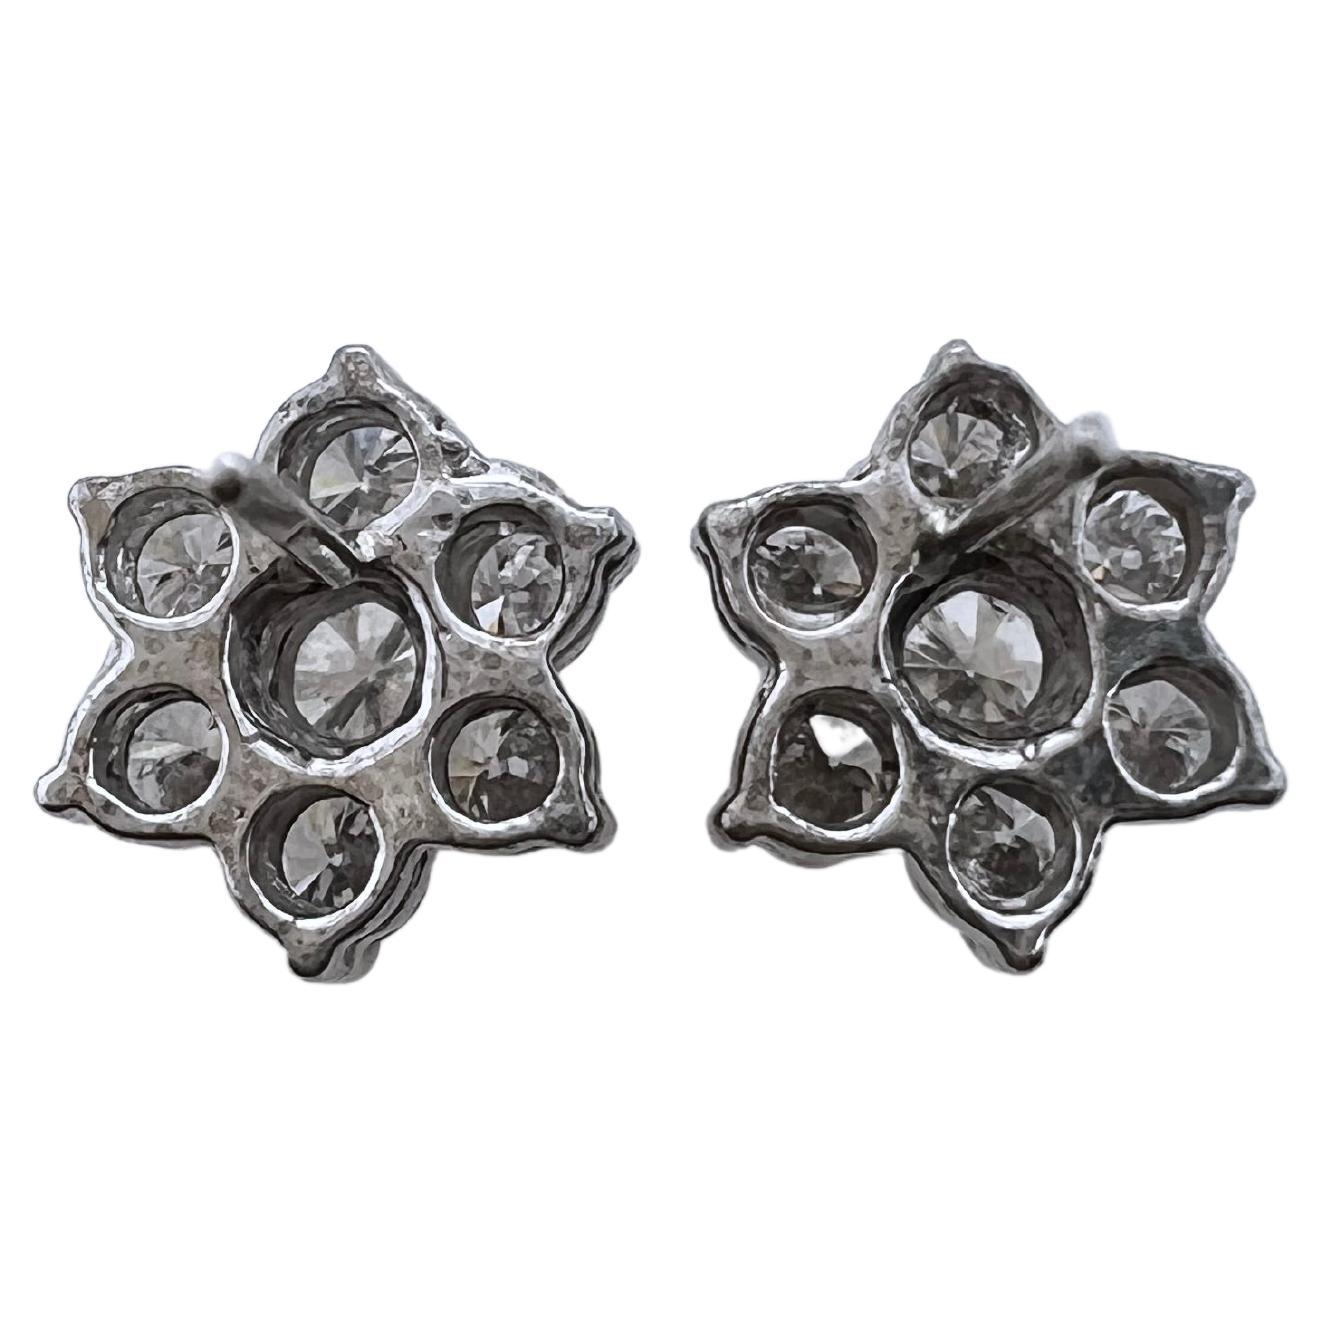 This classic snowflake style earring is timeless and perfect for daily wear.  The round brilliant diamonds are arranged in a beautiful snowflake style that dazzles and radiates! It's perfect for casual or smart casual wear.  It's a must have in your